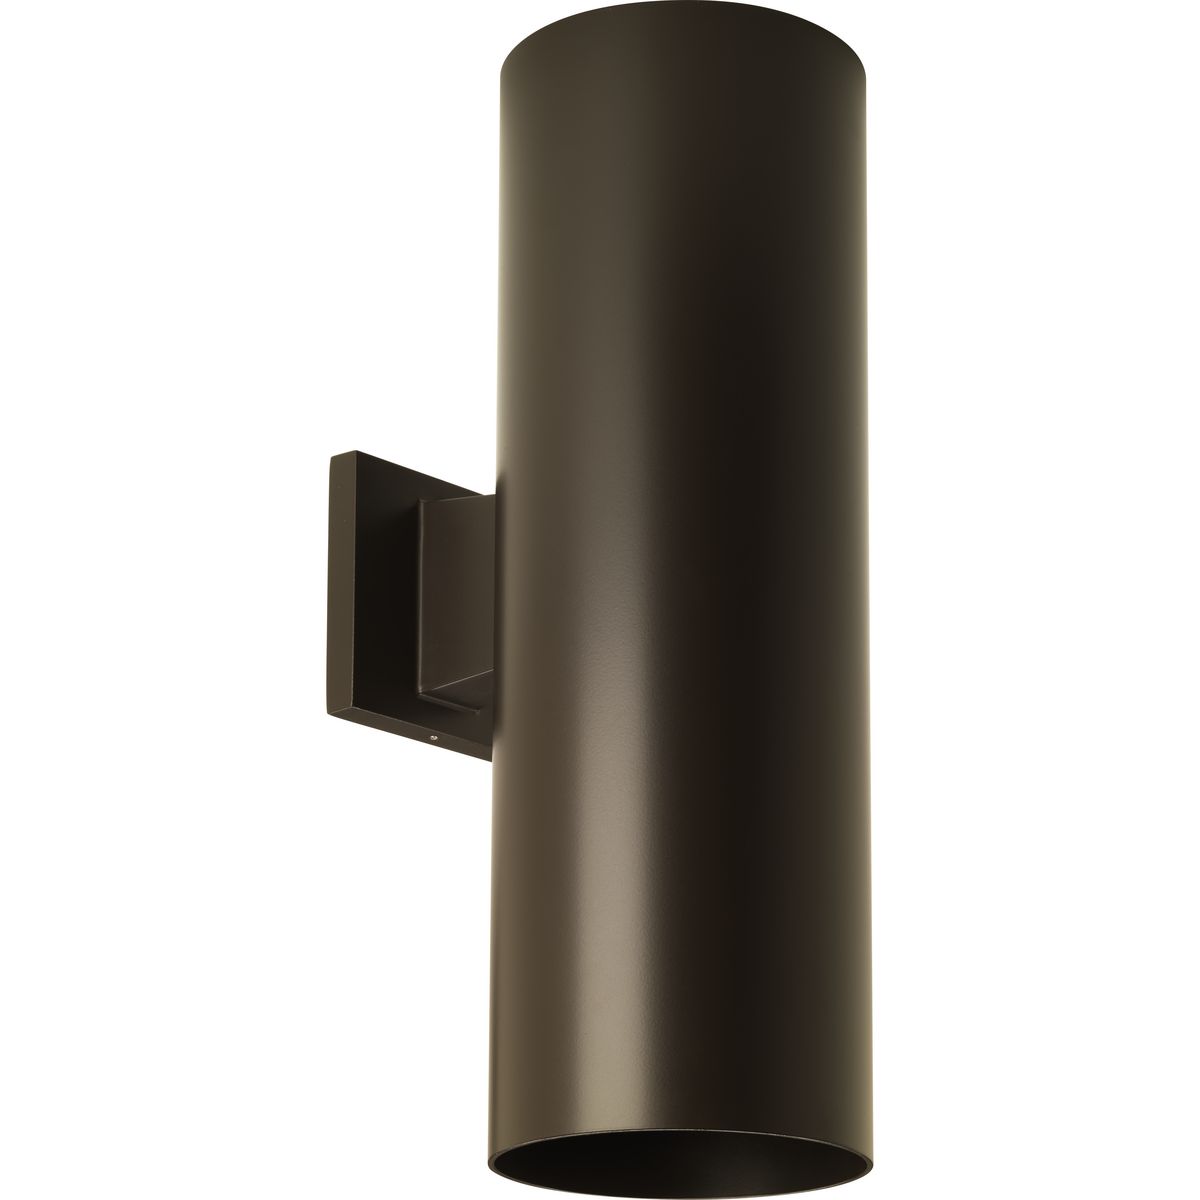 6" LED Outdoor Up/Down Modern Antique Bronze Wall Cylinder with Glass Top Lense - Wet Location Listed - Model P560295-020-30